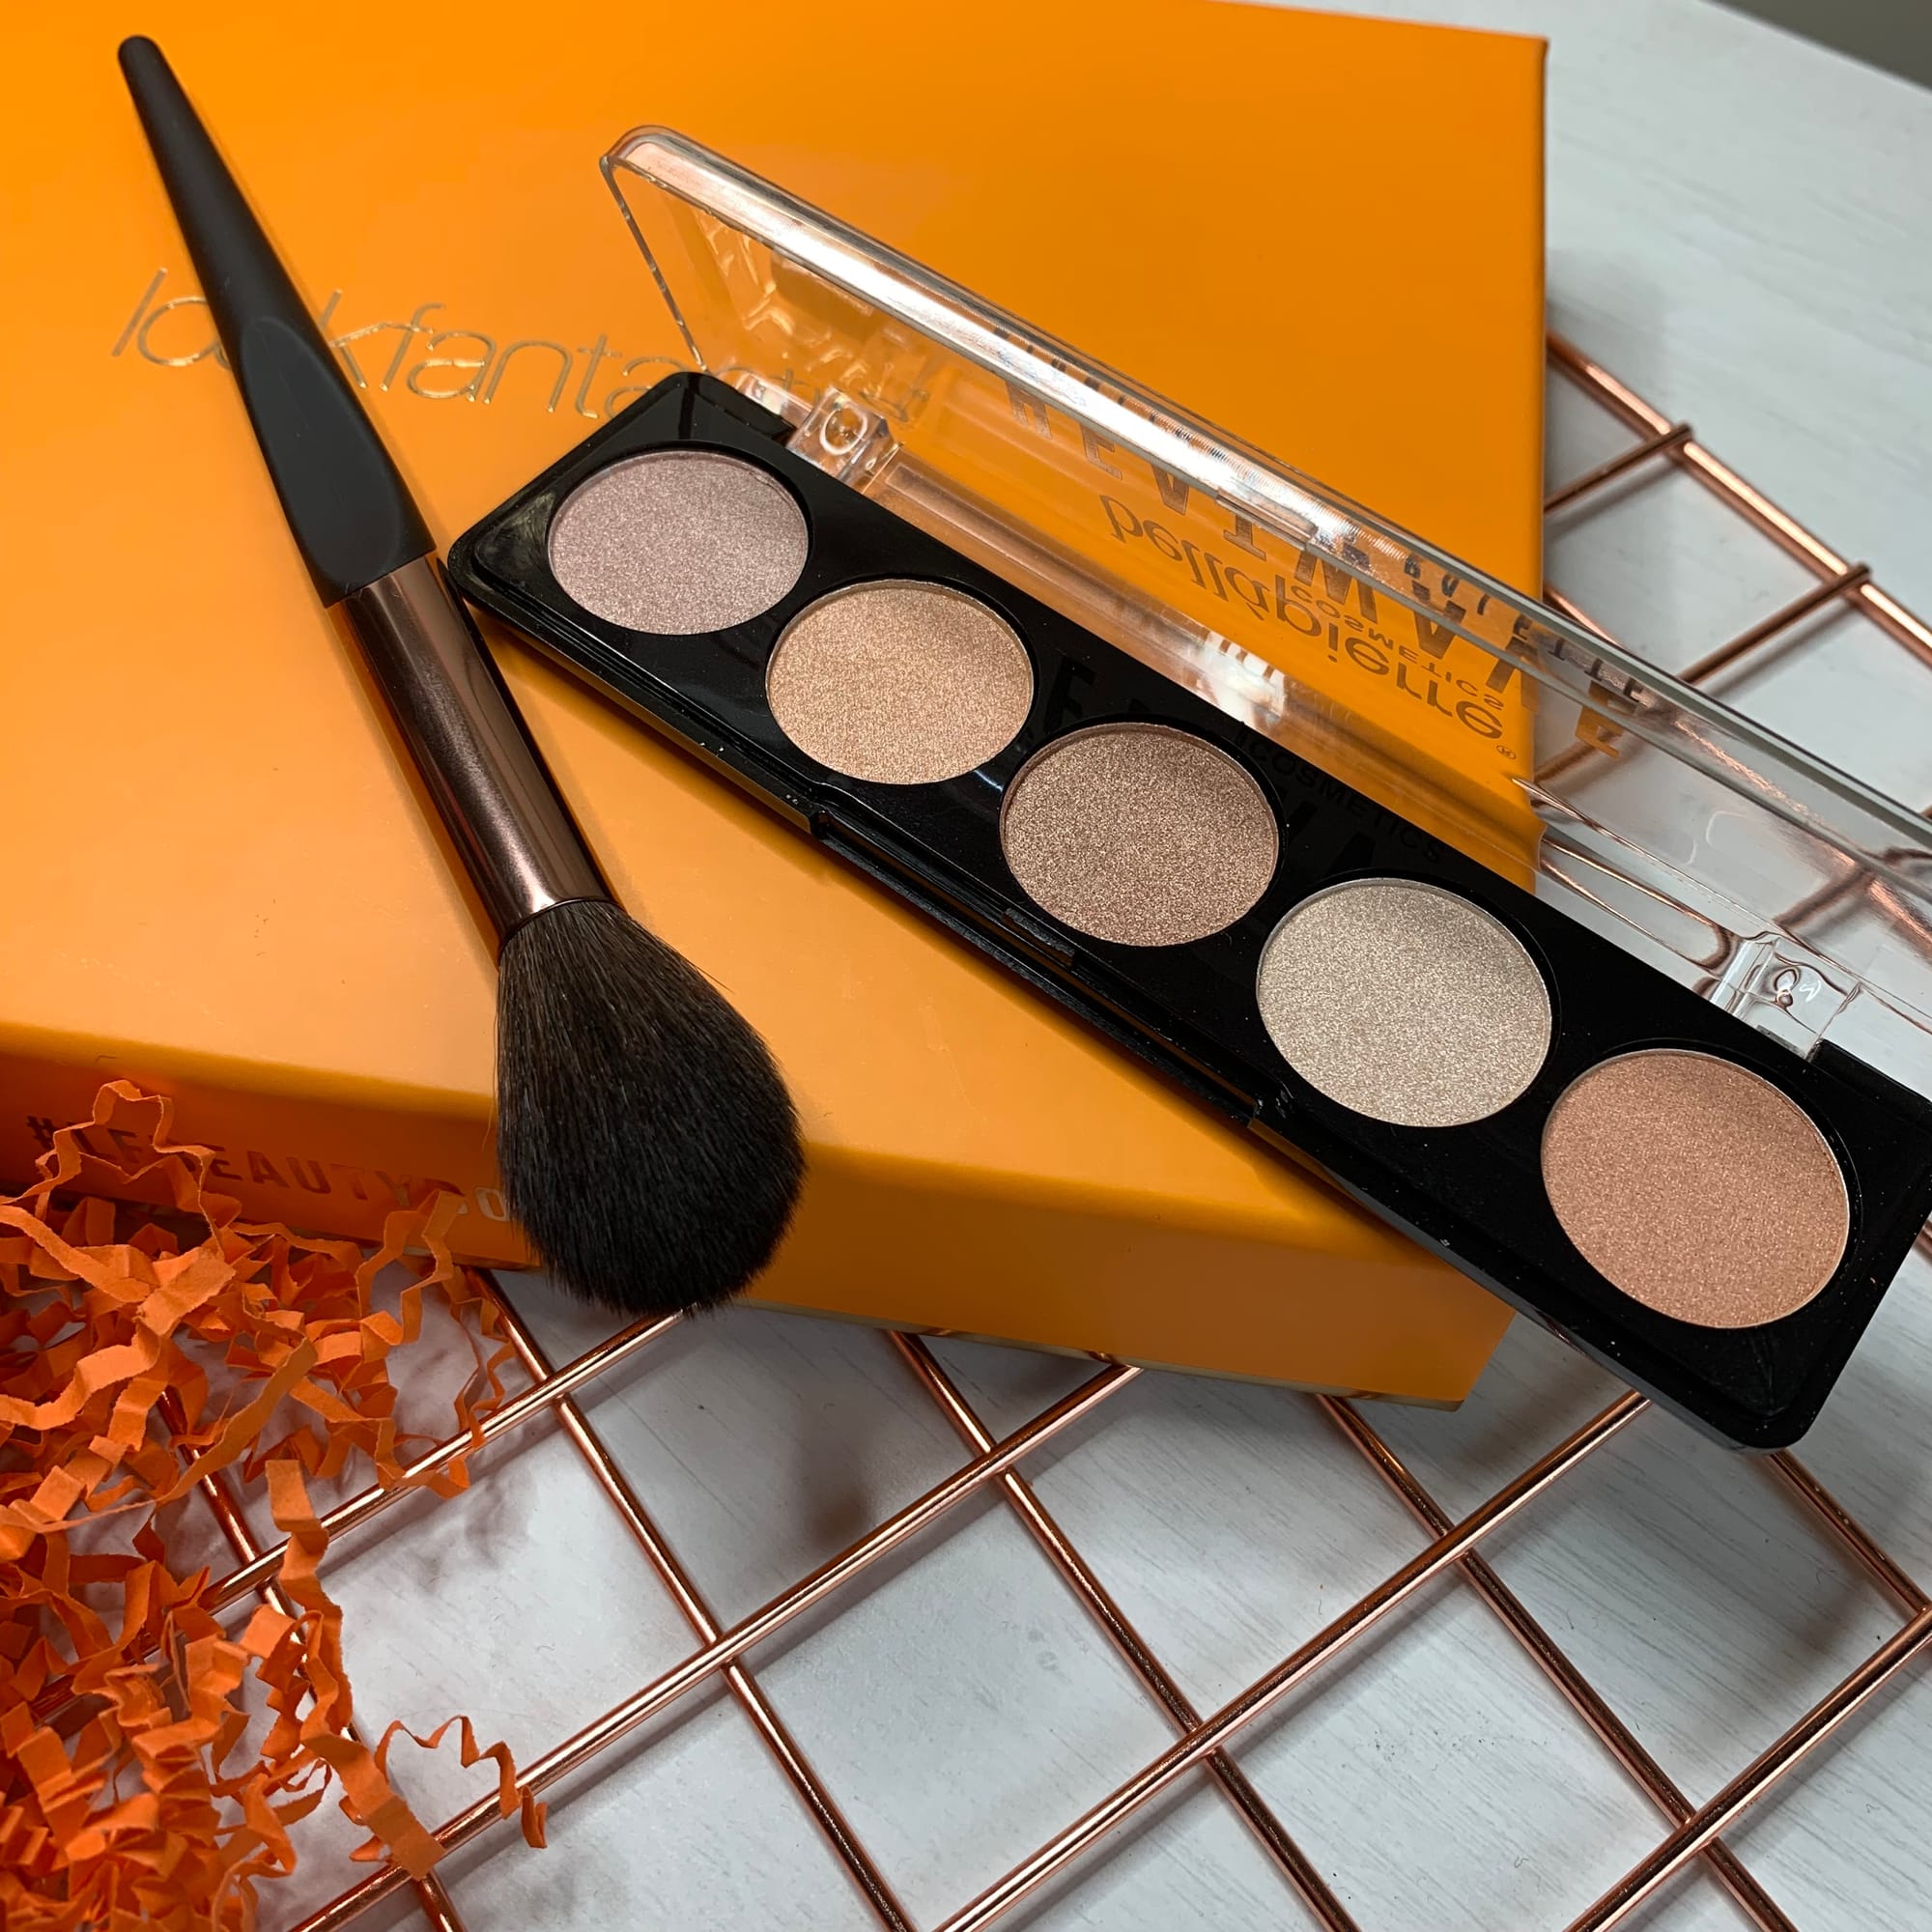 Luxie Tapered Highlight Brush - Look Fantastic Beauty Box Review - August 2019 - Miss Boux